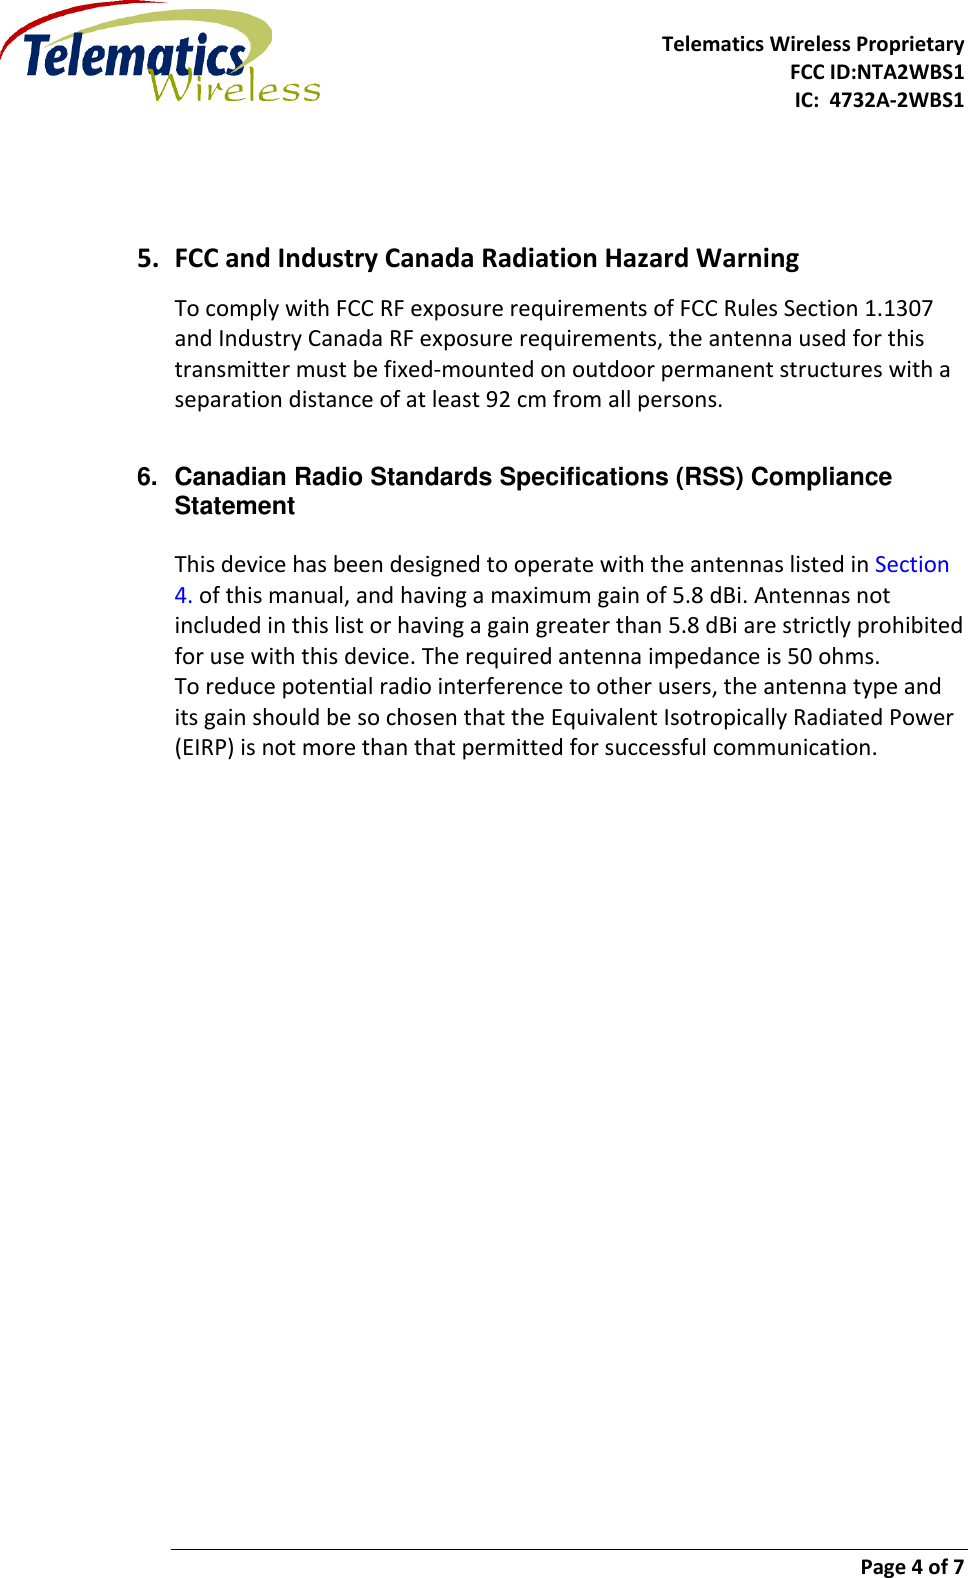     Telematics Wireless Proprietary   FCC ID:NTA2WBS1              IC:  4732A-2WBS1       Page 4 of 7     5. FCC and Industry Canada Radiation Hazard Warning To comply with FCC RF exposure requirements of FCC Rules Section 1.1307 and Industry Canada RF exposure requirements, the antenna used for this transmitter must be fixed-mounted on outdoor permanent structures with a separation distance of at least 92 cm from all persons.   6.  Canadian Radio Standards Specifications (RSS) Compliance Statement  This device has been designed to operate with the antennas listed in Section 4. of this manual, and having a maximum gain of 5.8 dBi. Antennas not included in this list or having a gain greater than 5.8 dBi are strictly prohibited for use with this device. The required antenna impedance is 50 ohms. To reduce potential radio interference to other users, the antenna type and its gain should be so chosen that the Equivalent Isotropically Radiated Power (EIRP) is not more than that permitted for successful communication.     